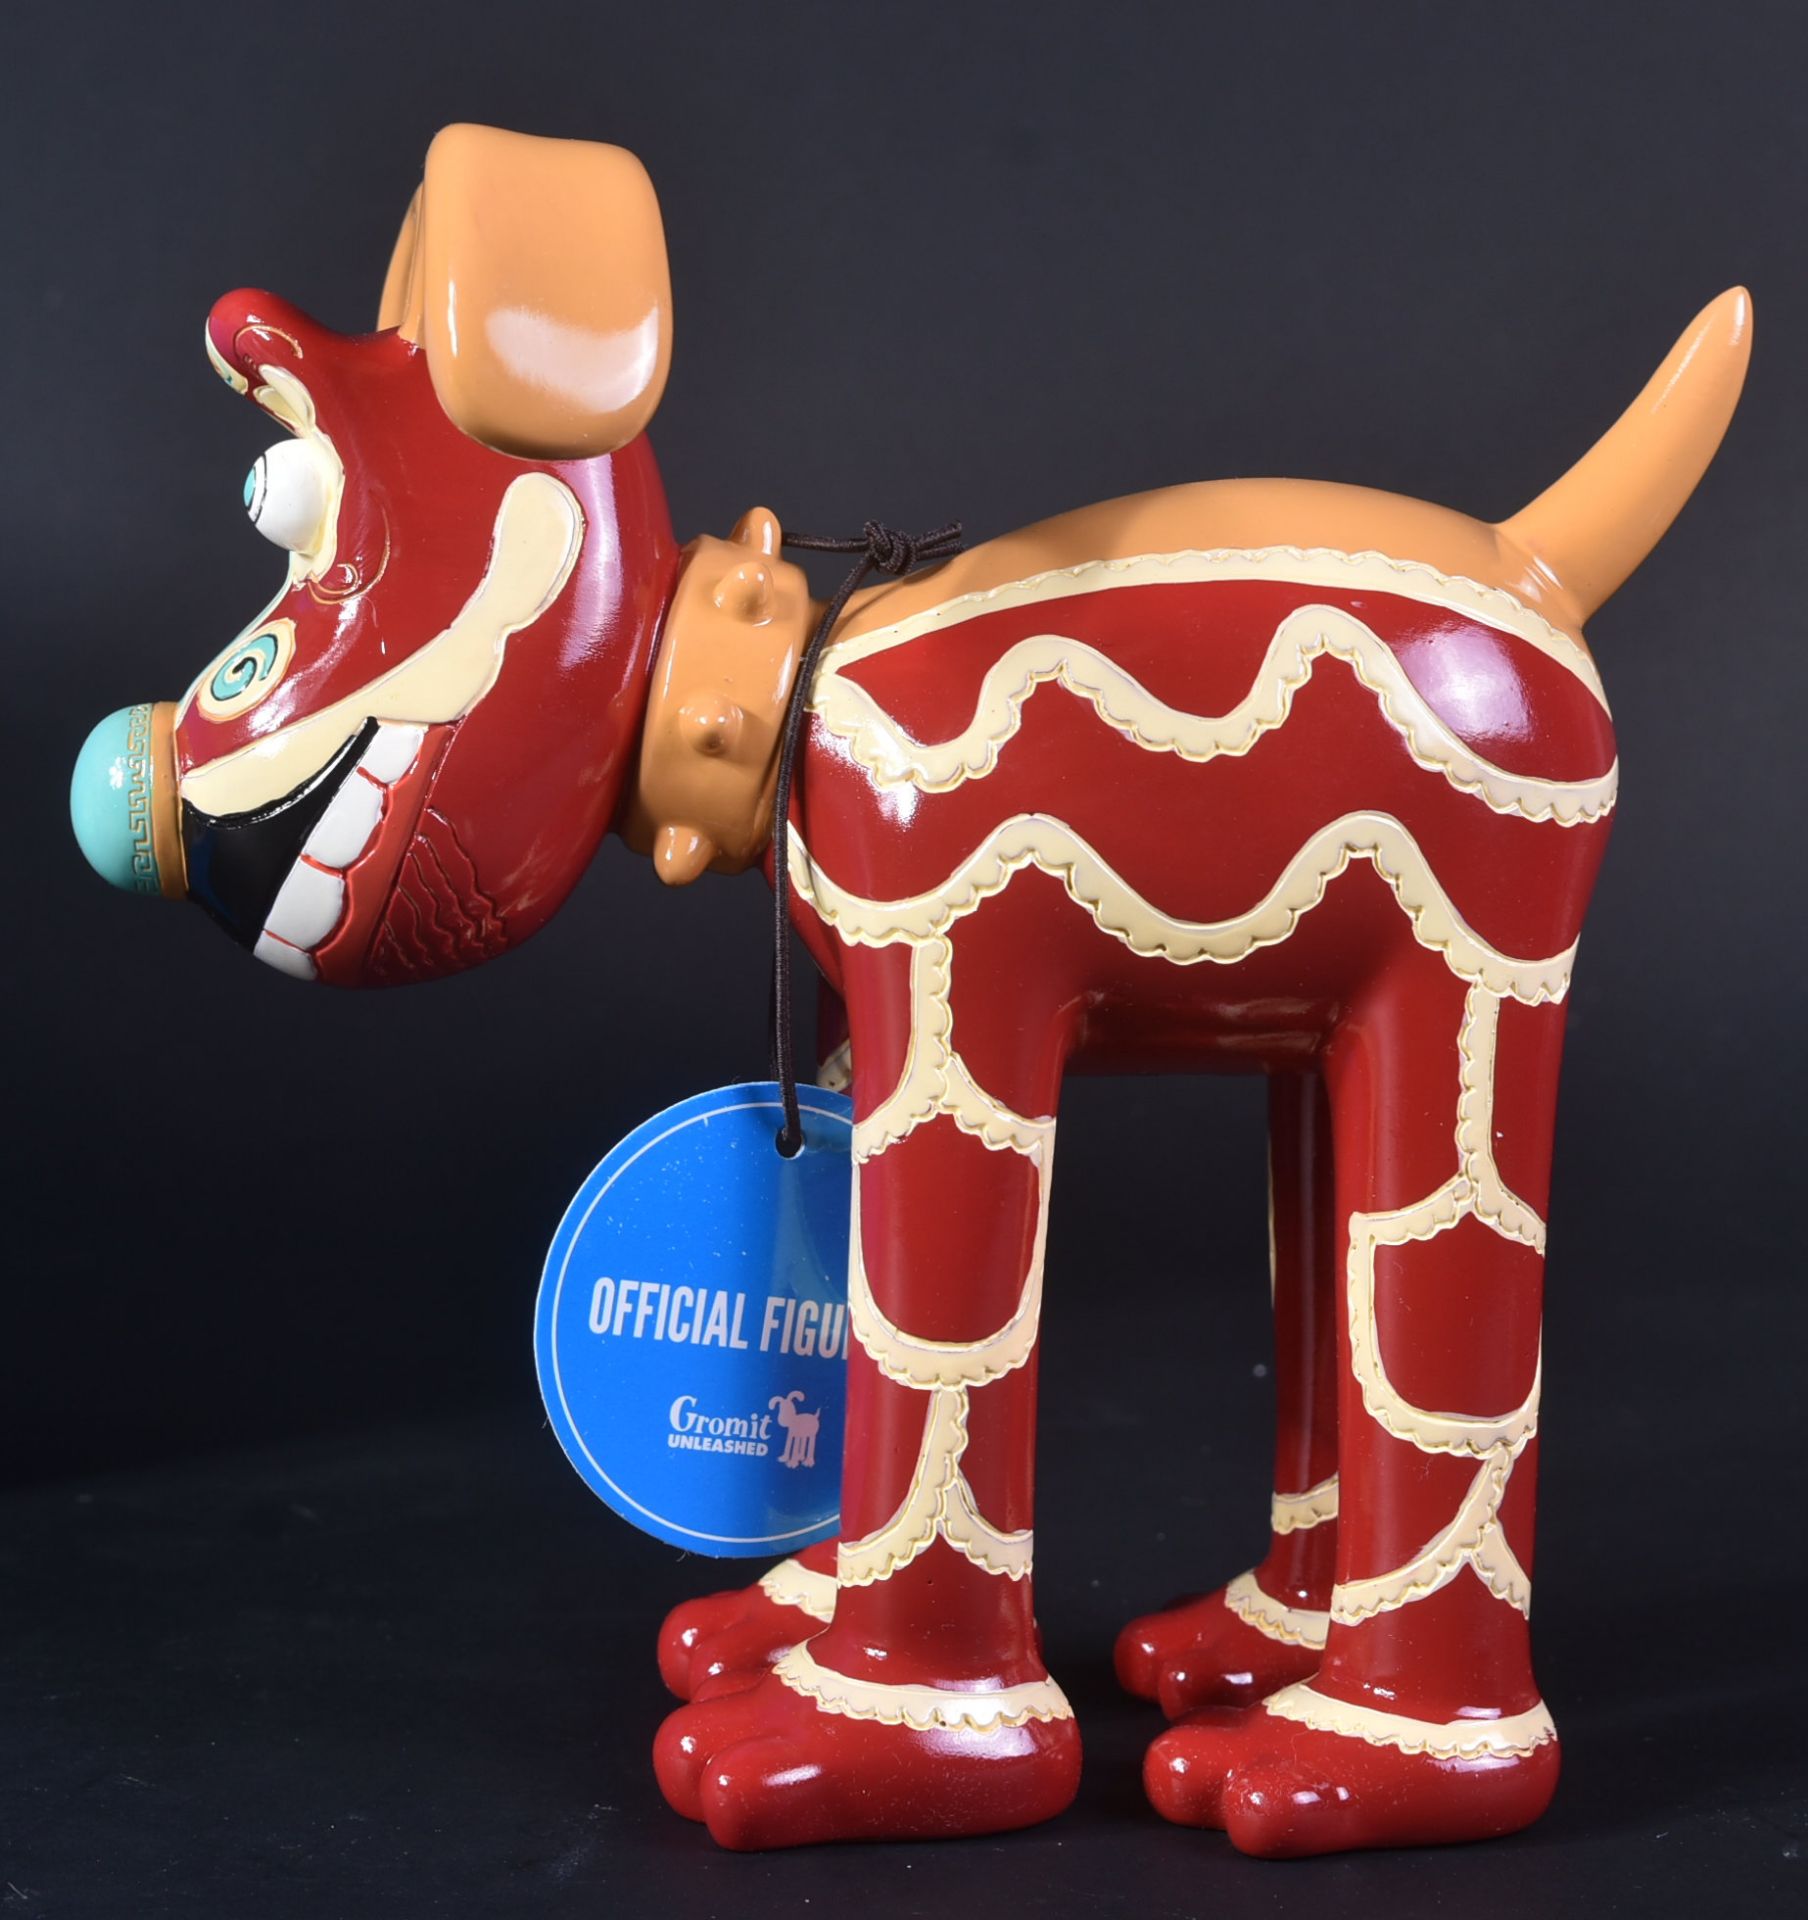 WALLACE & GROMIT - GROMIT UNLEASHED COLLECTABLE FIGURINE - Image 3 of 5